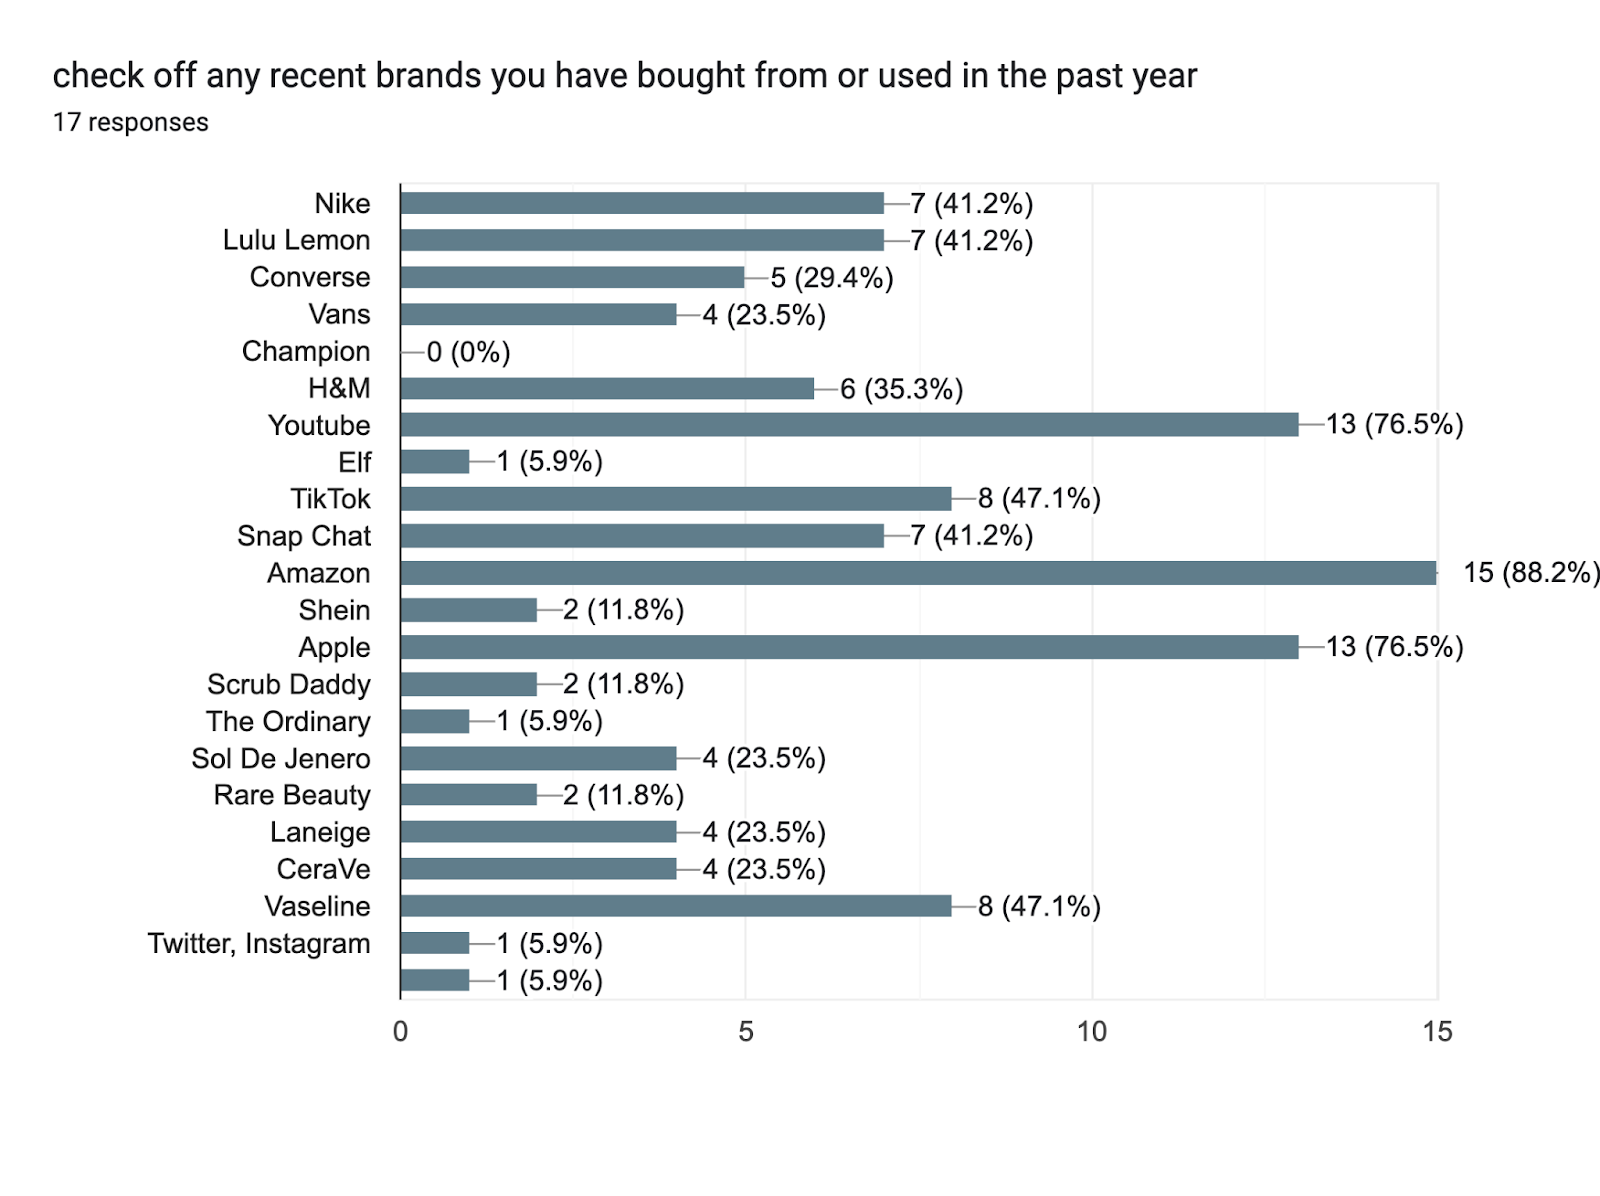 Forms response chart. Question title: check off any recent brands you have bought from or used in the past year. Number of responses: 17 responses.